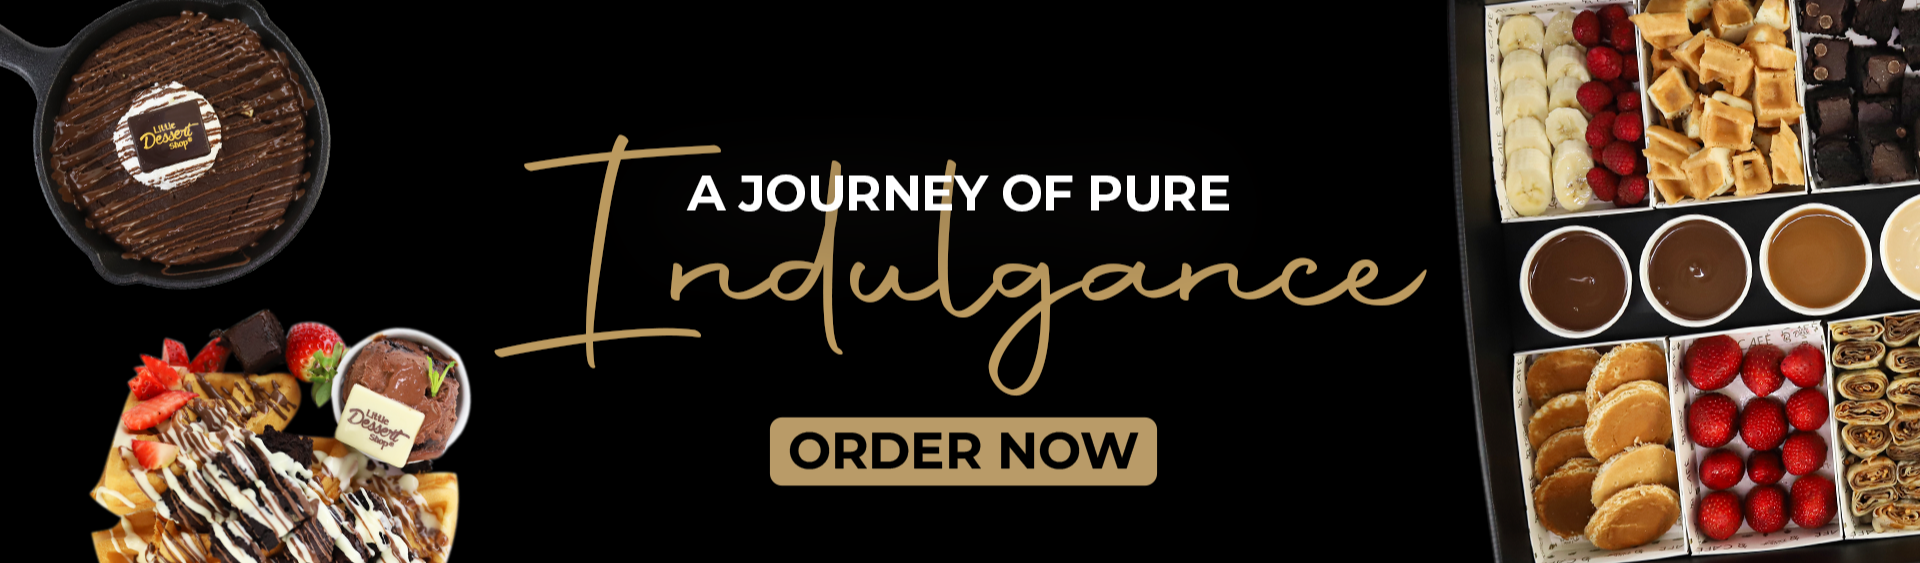 A Journey of pure indulgence